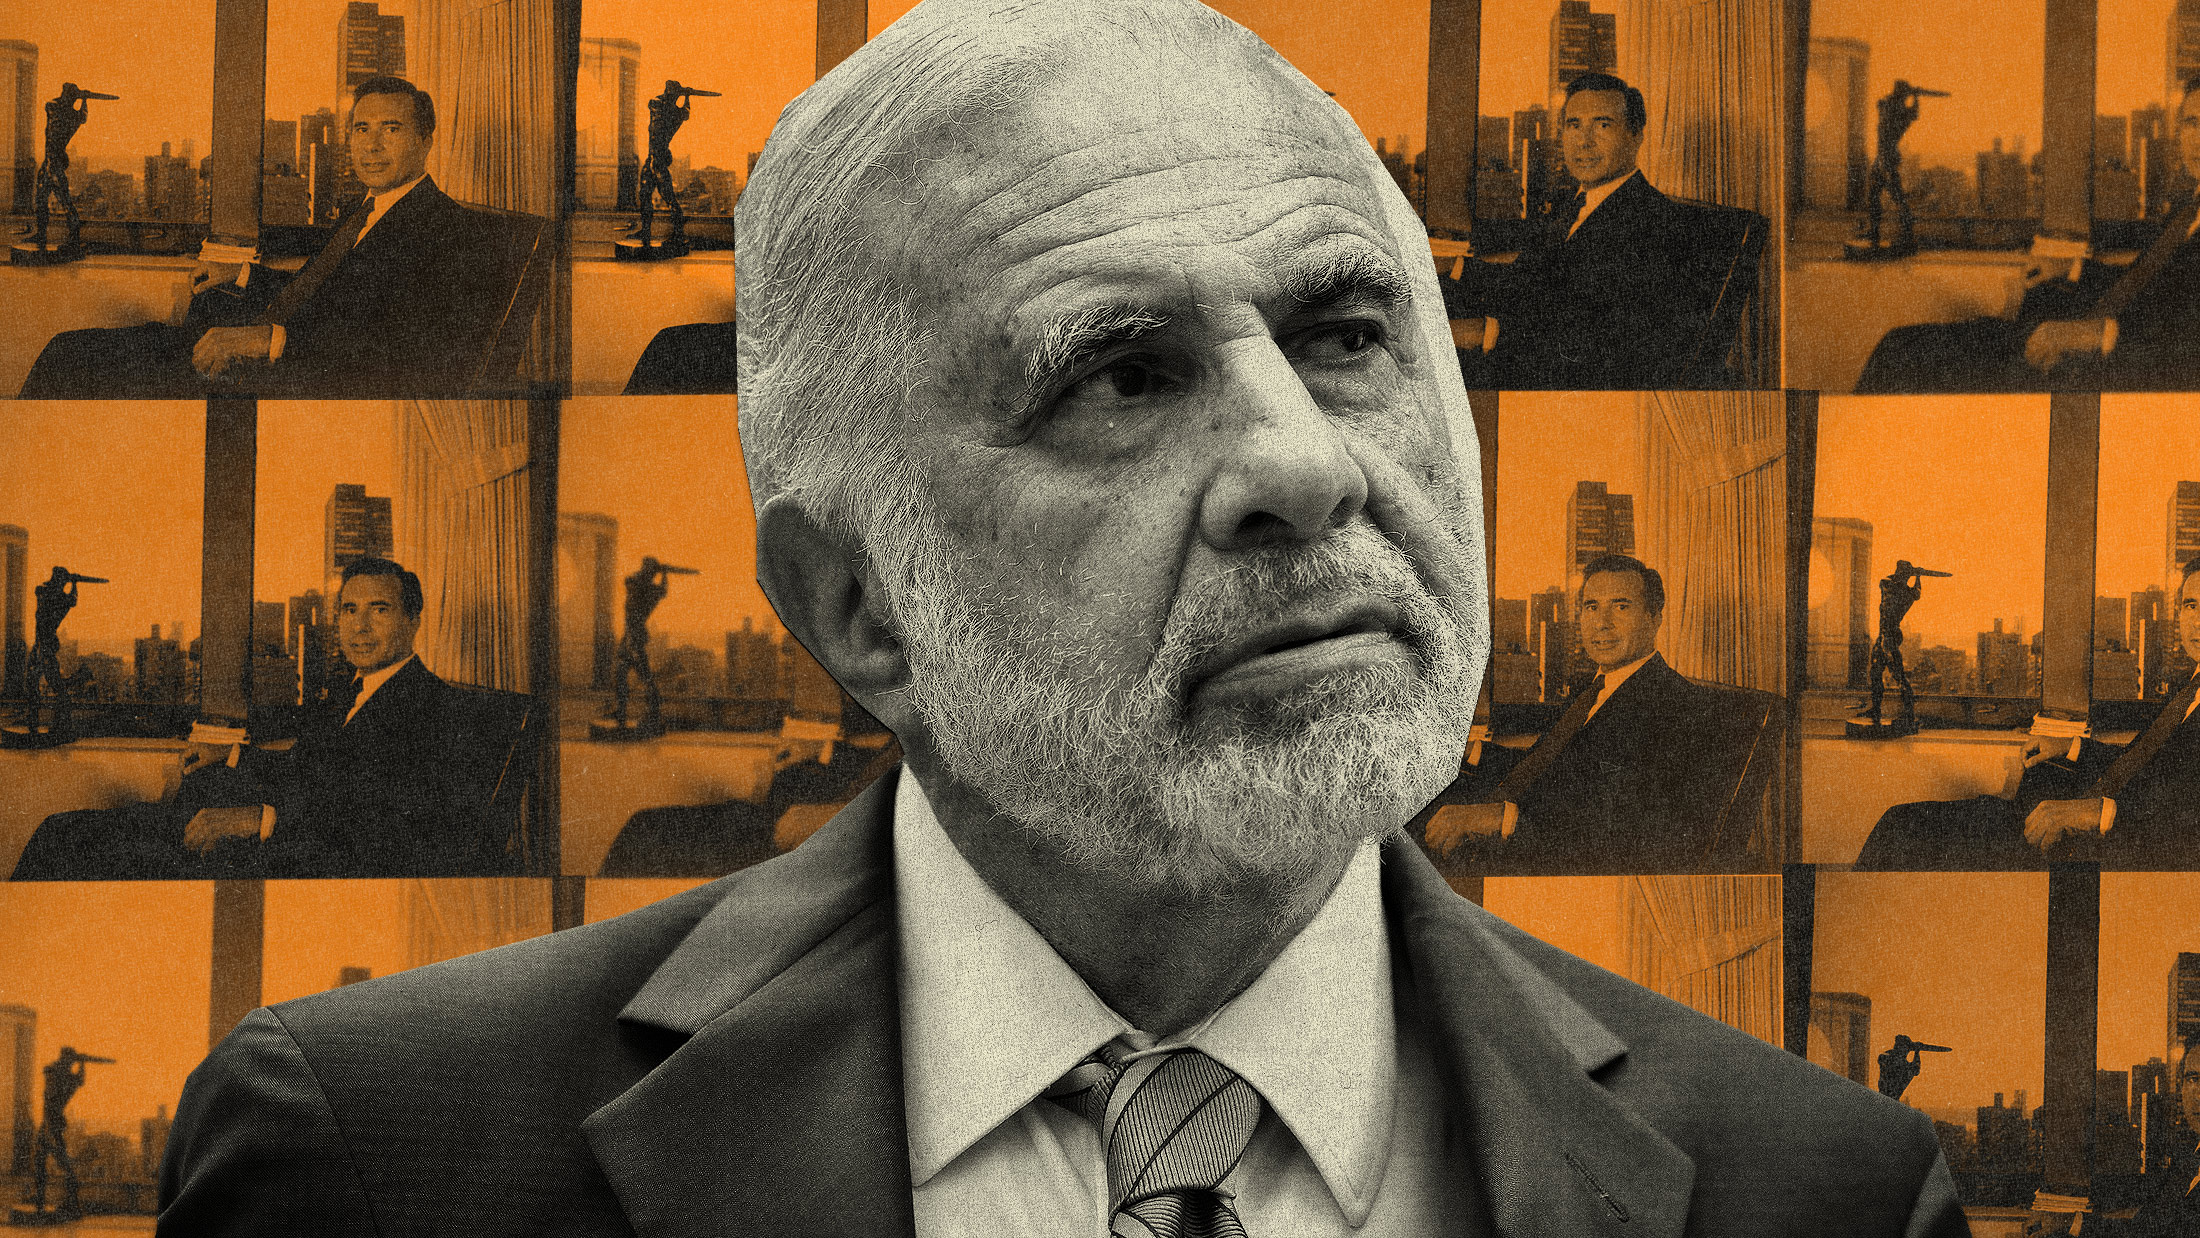 Carl Icahn's Net Worth Takes 15 Billion Hit But He's Ready to Fight